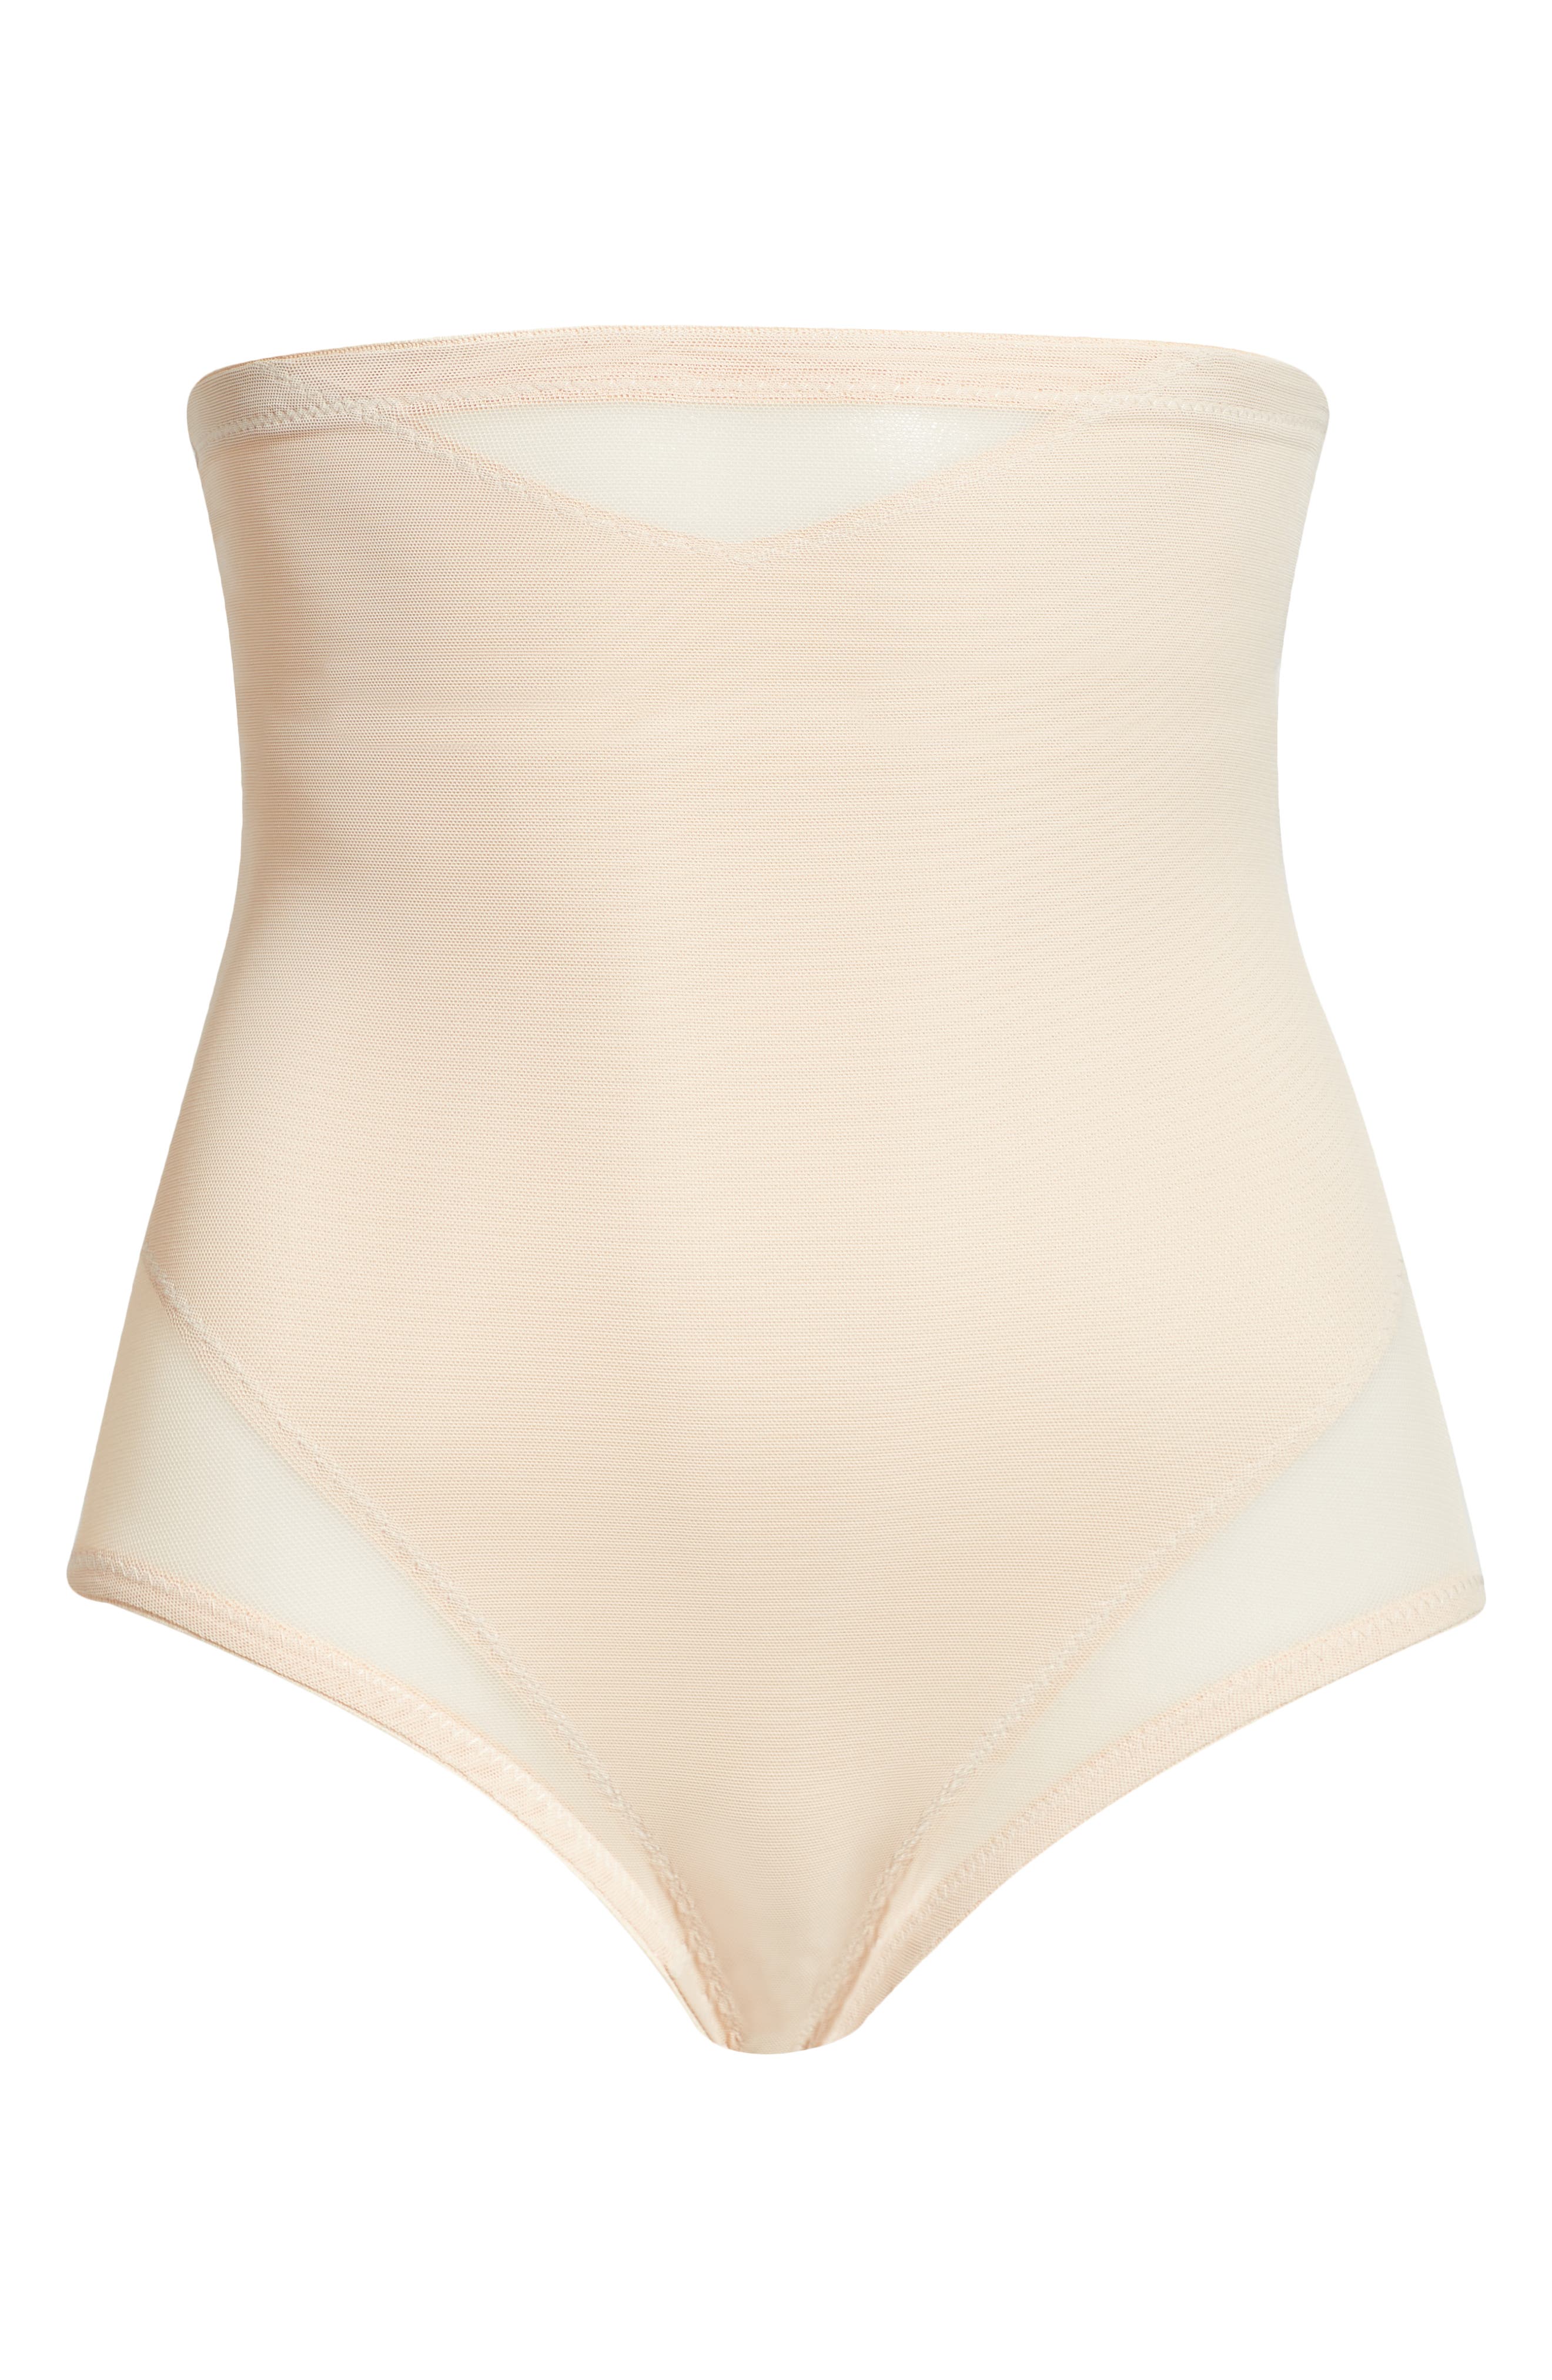 Miraclesuit Women's Extra Firm Tummy-Control Sheer Trim High Waist Brief  2785 - Stucco